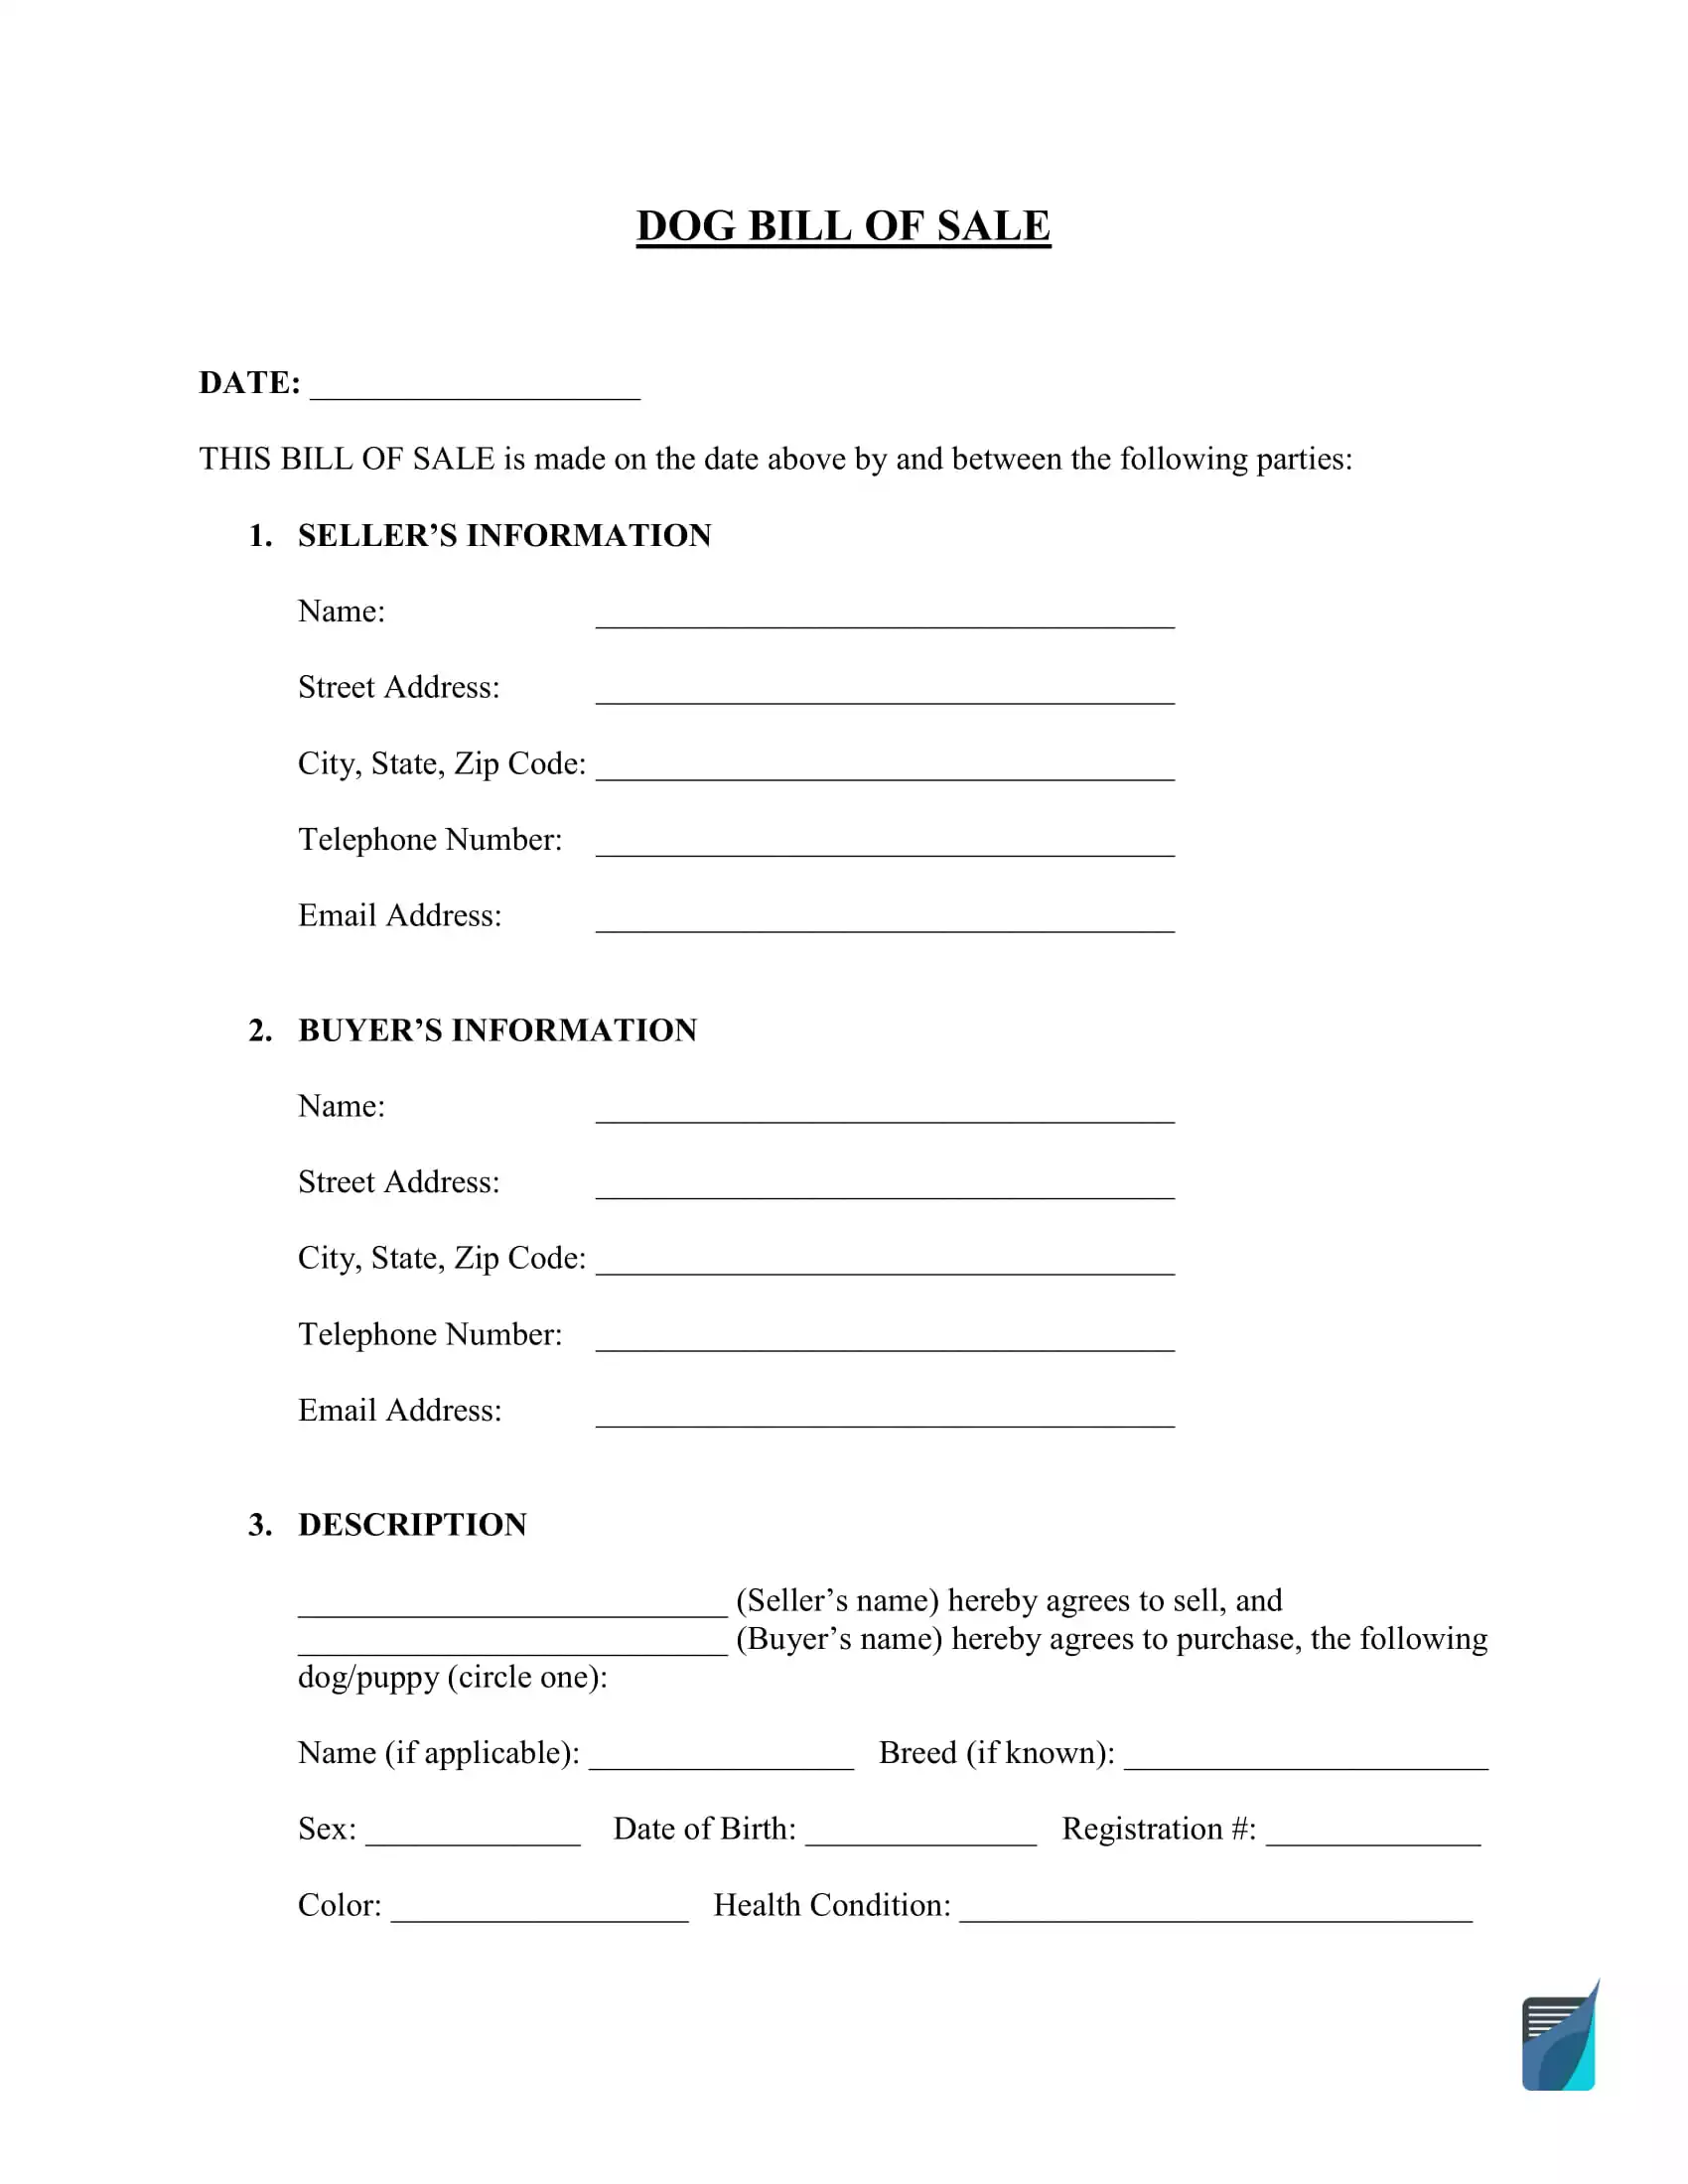 Free Dog (Puppy) Bill of Sale Template  FormsPal Within puppy contract templates